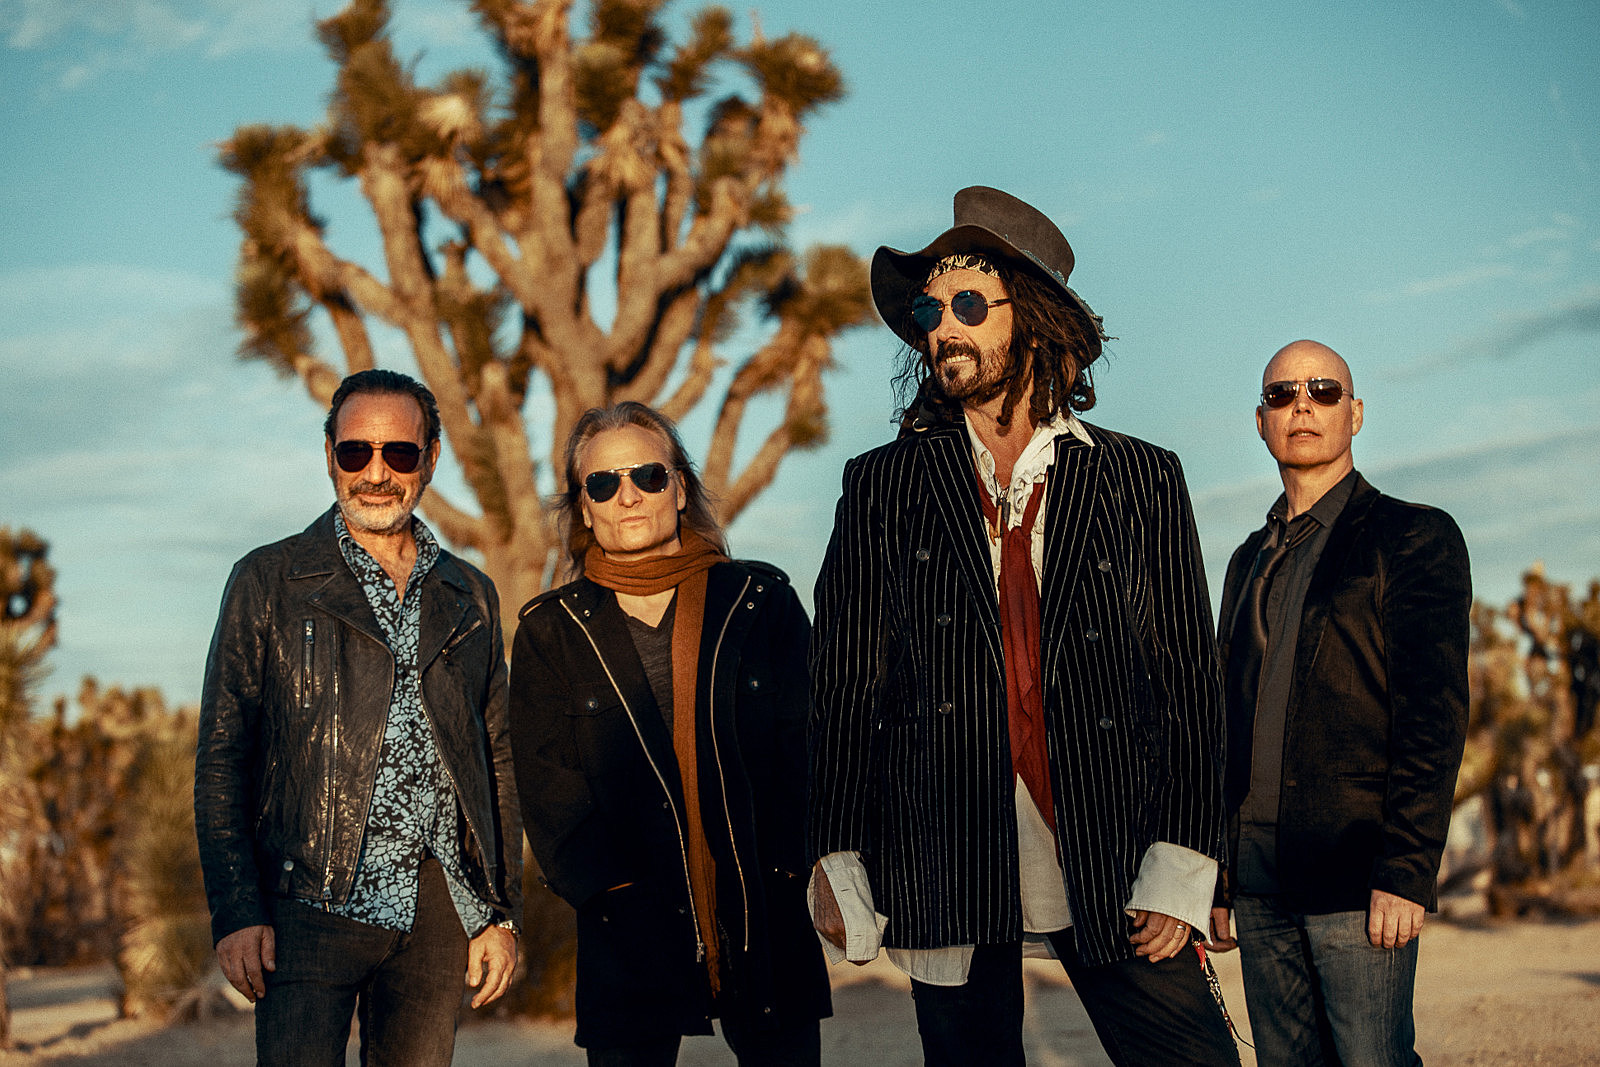 How Mike Campbell Found His Way Out of Isolation With New Album